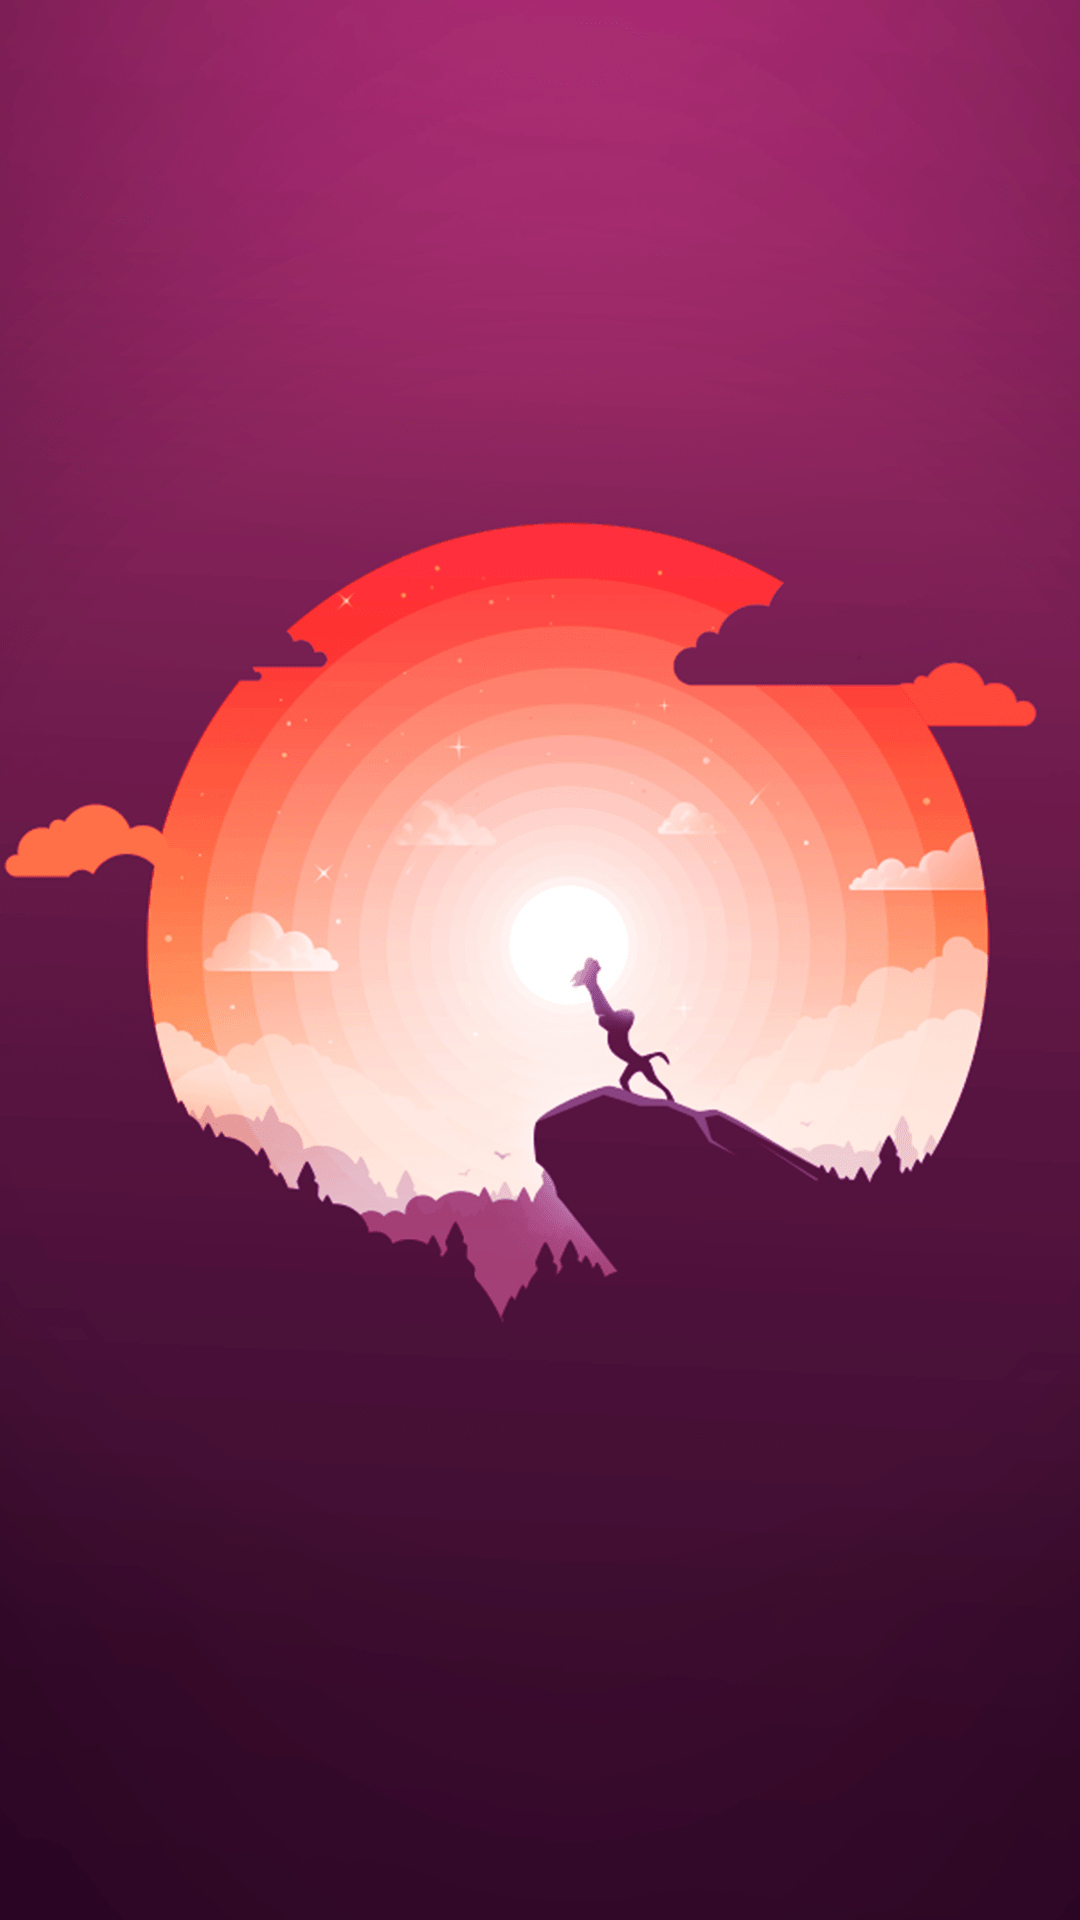 A deer standing on a cliff in front of a sunset - The Lion King